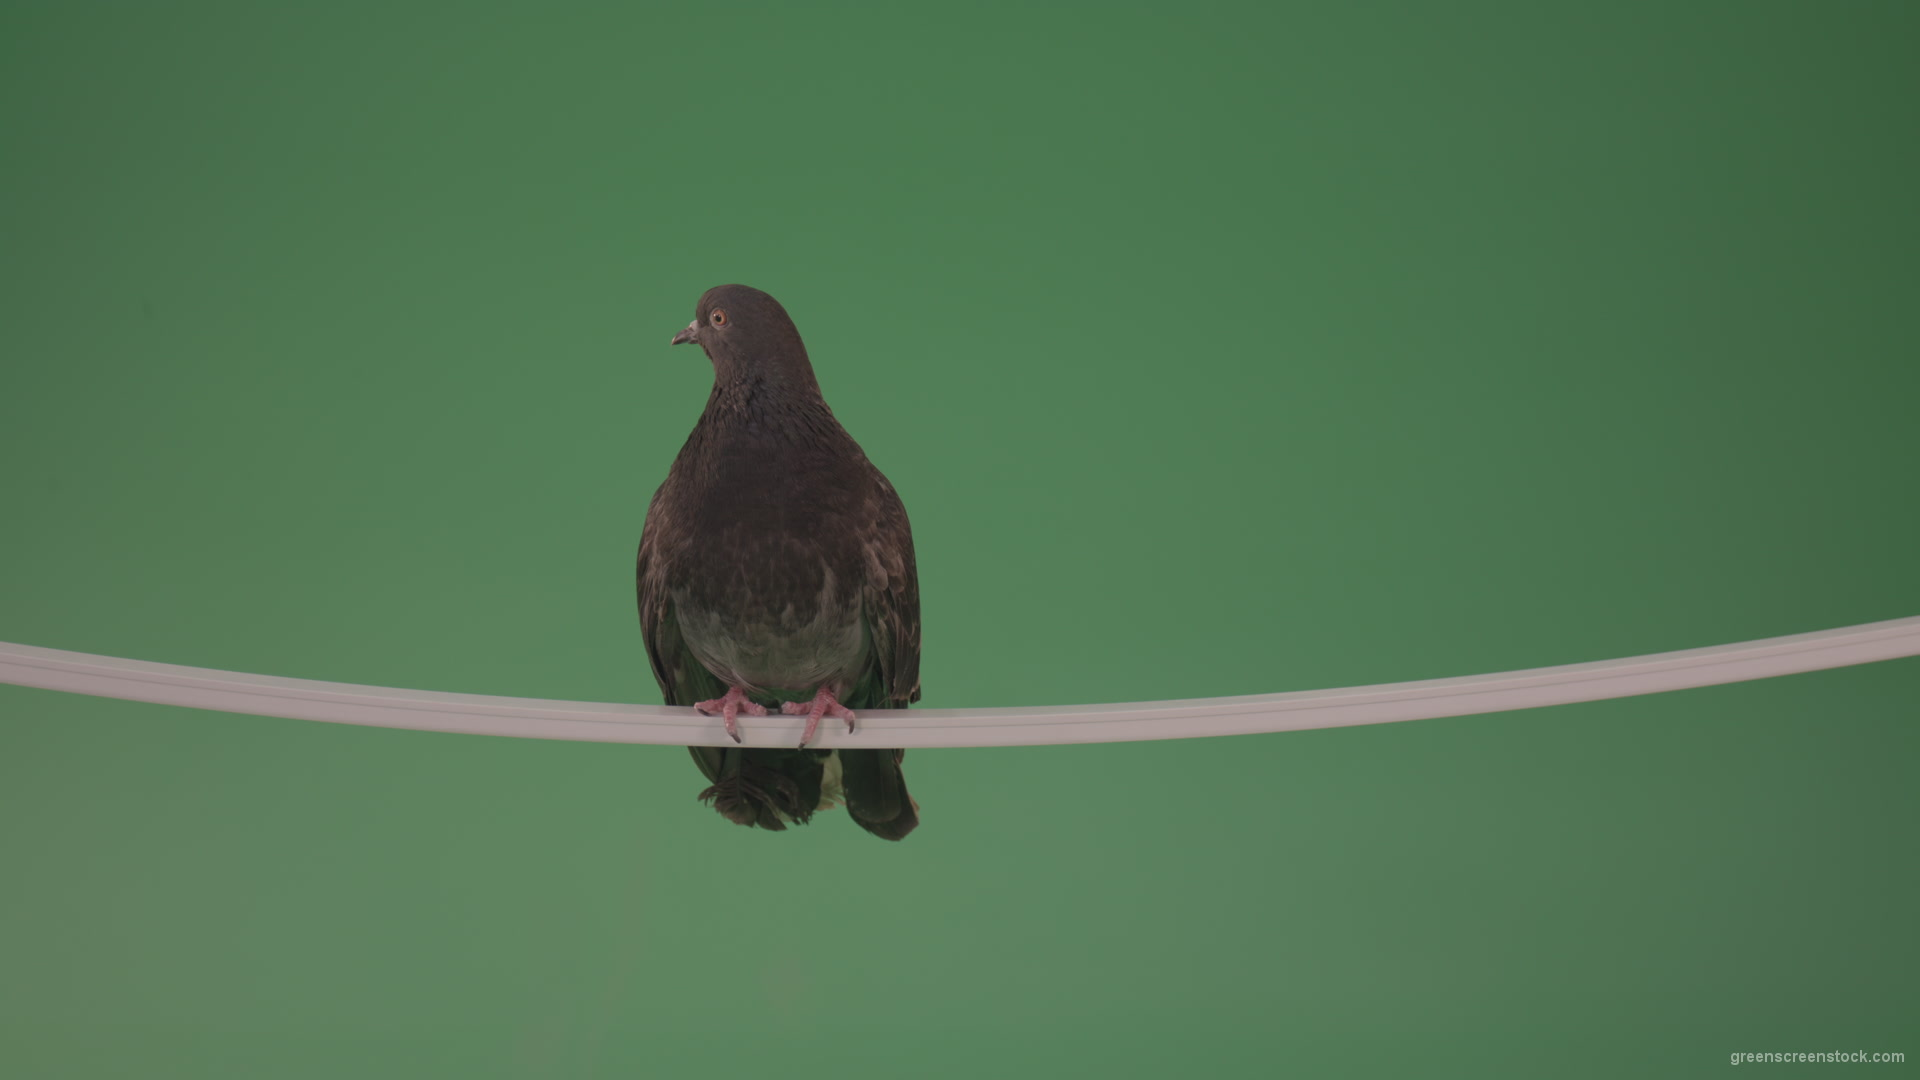 Beautiful-bird-of-doves-flew-to-explore-the-terrain-isolated-on-chromakey-background_002 Green Screen Stock